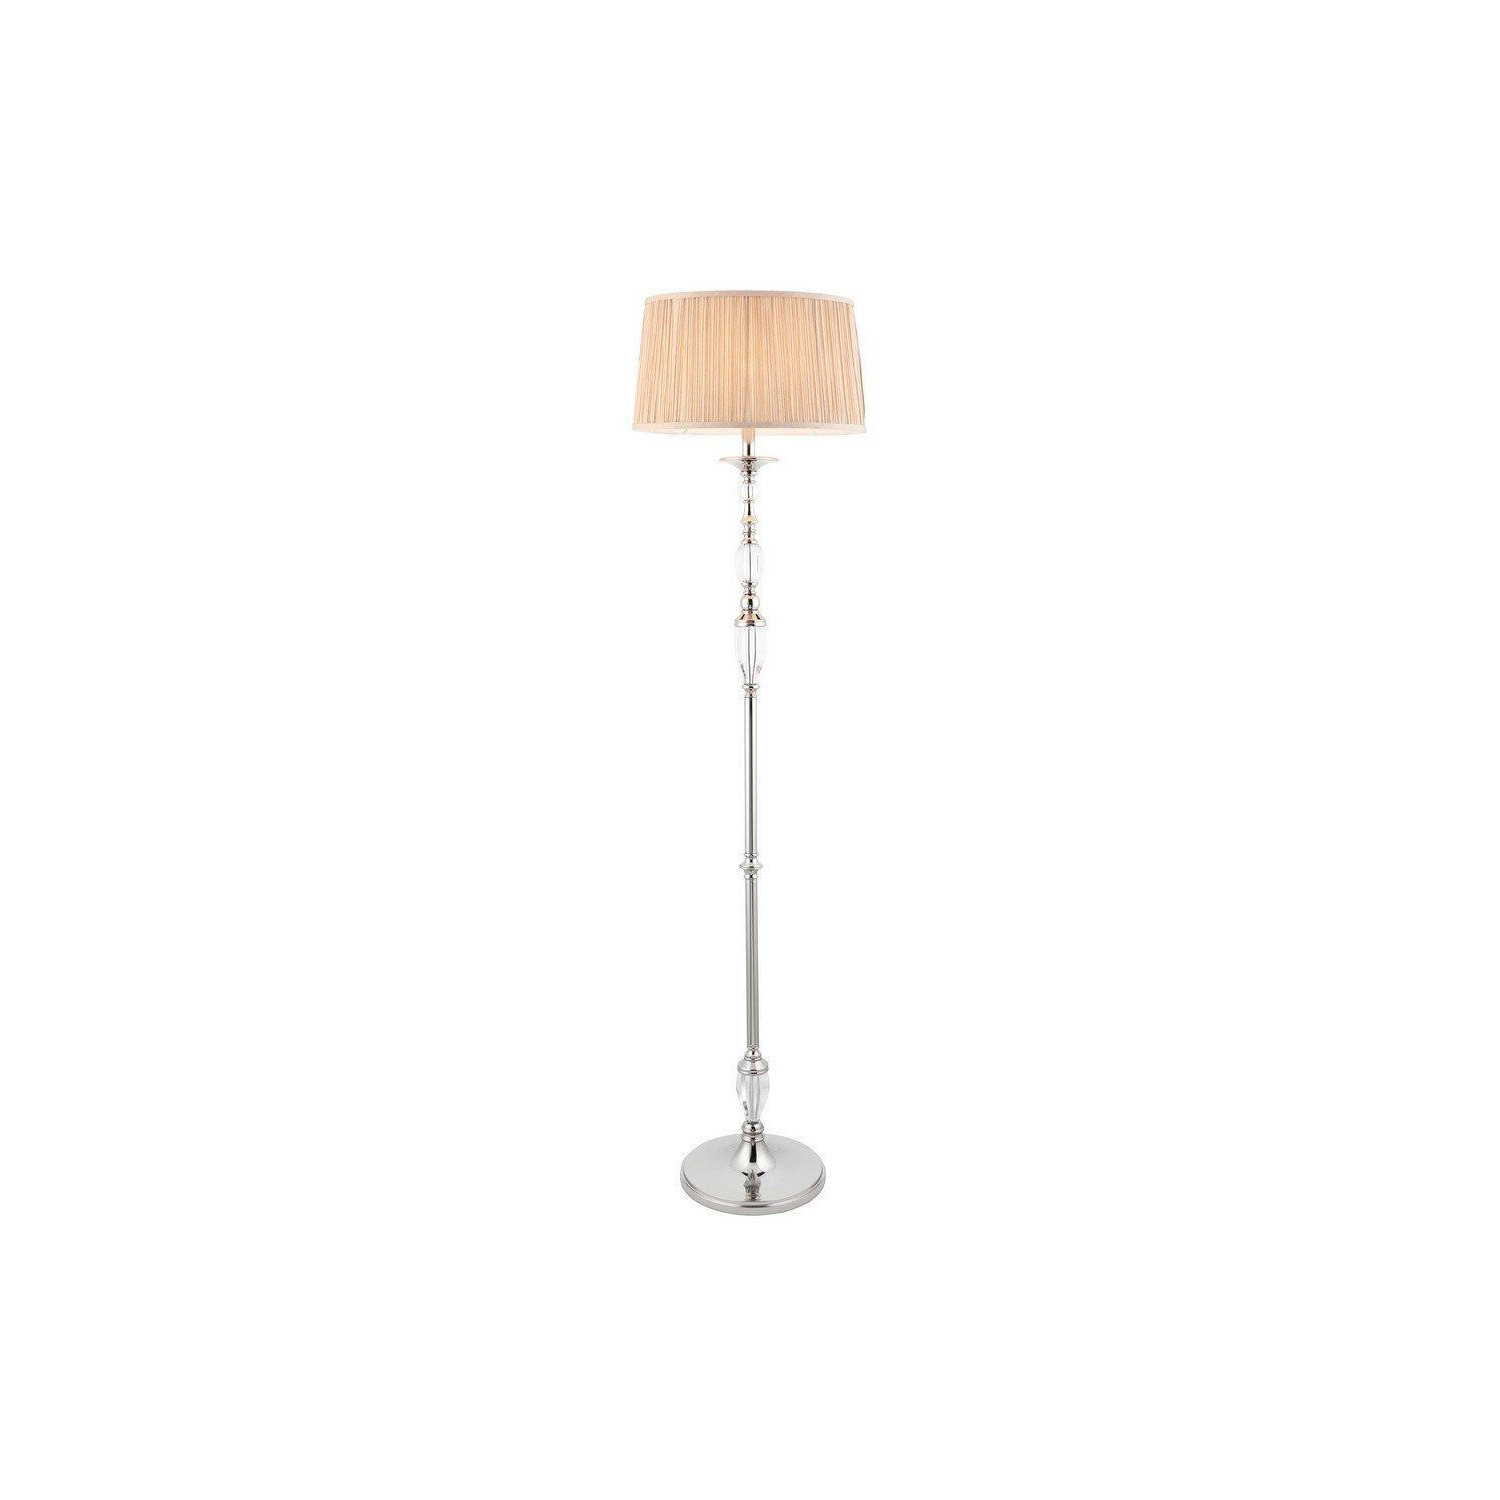 Polina 1 Light Floor Lamp Polished Nickel Plate with Beige Shade E27 - image 1